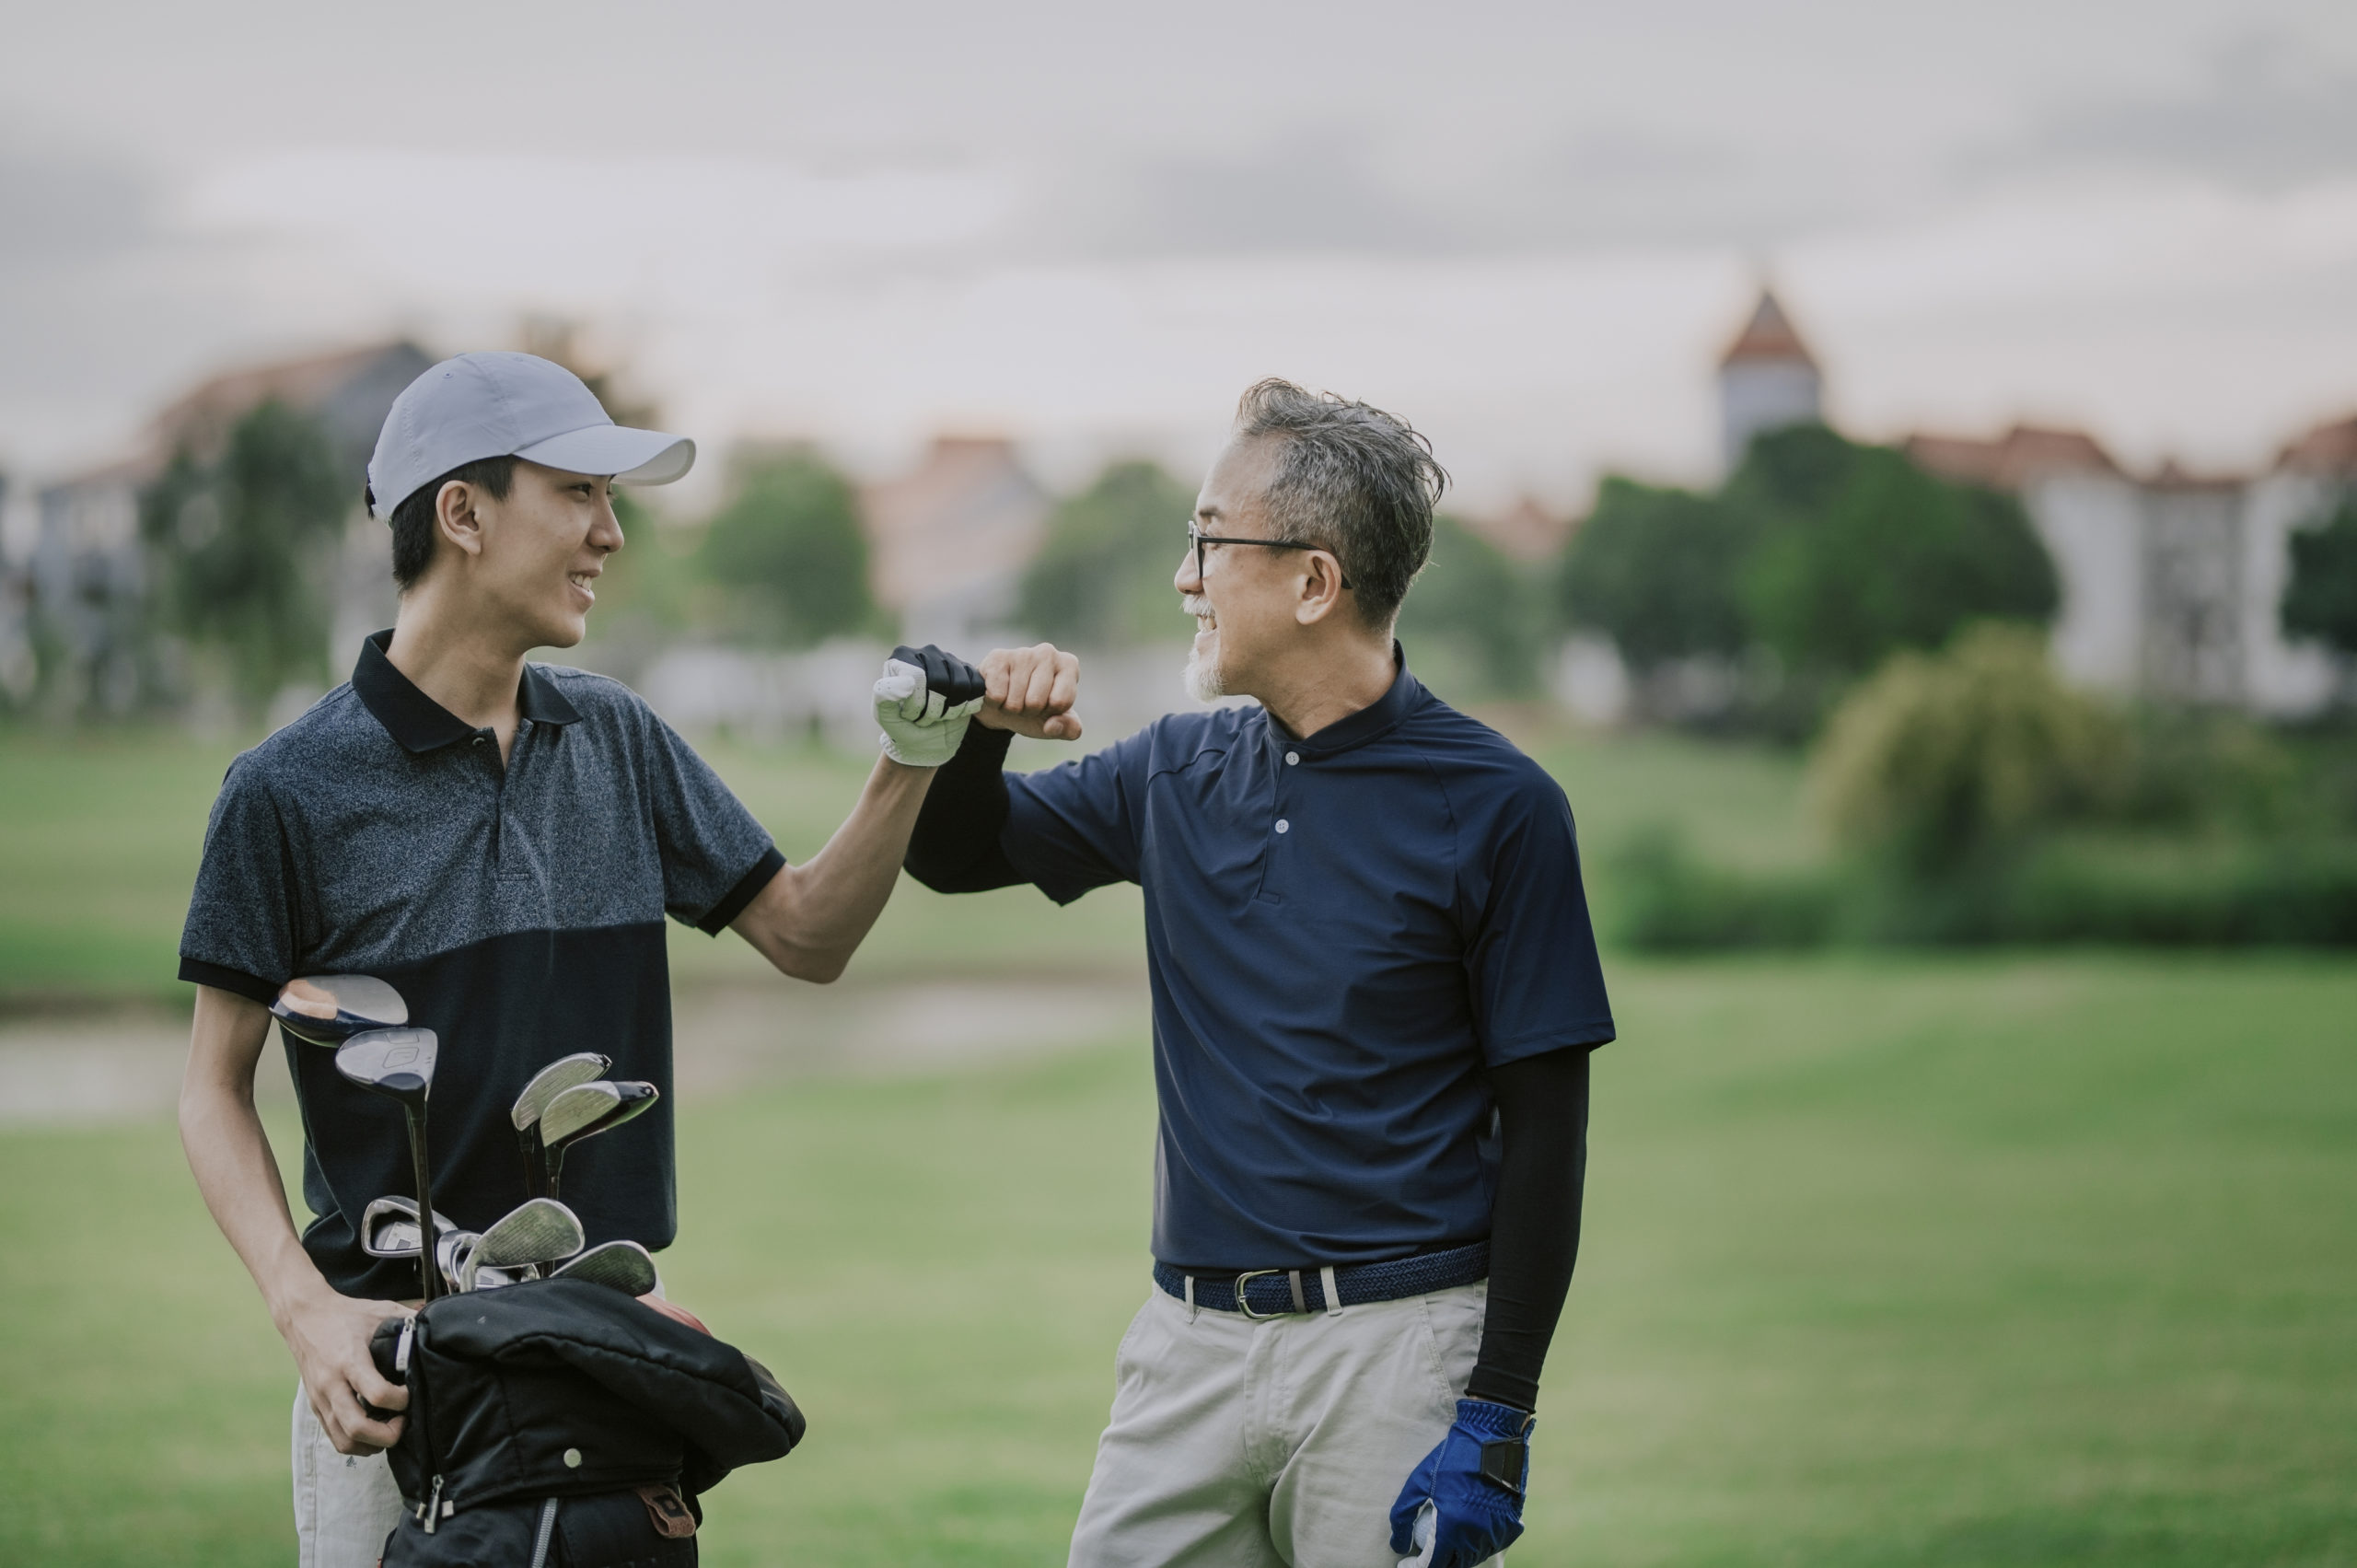 A Father and Son Playing Golf